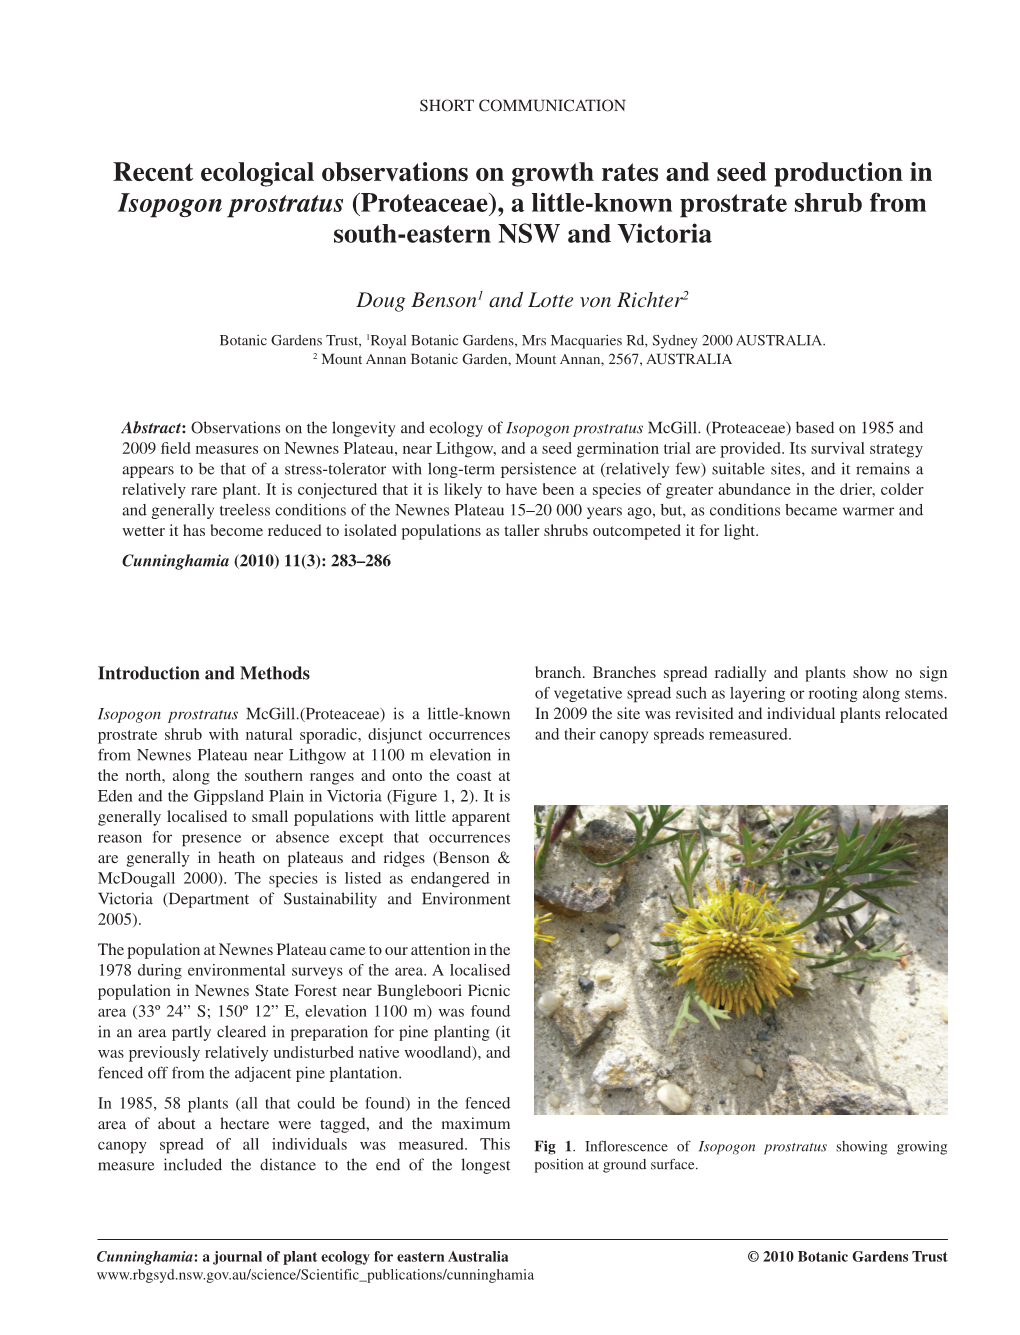 Recent Ecological Observations on Growth Rates and Seed Production In